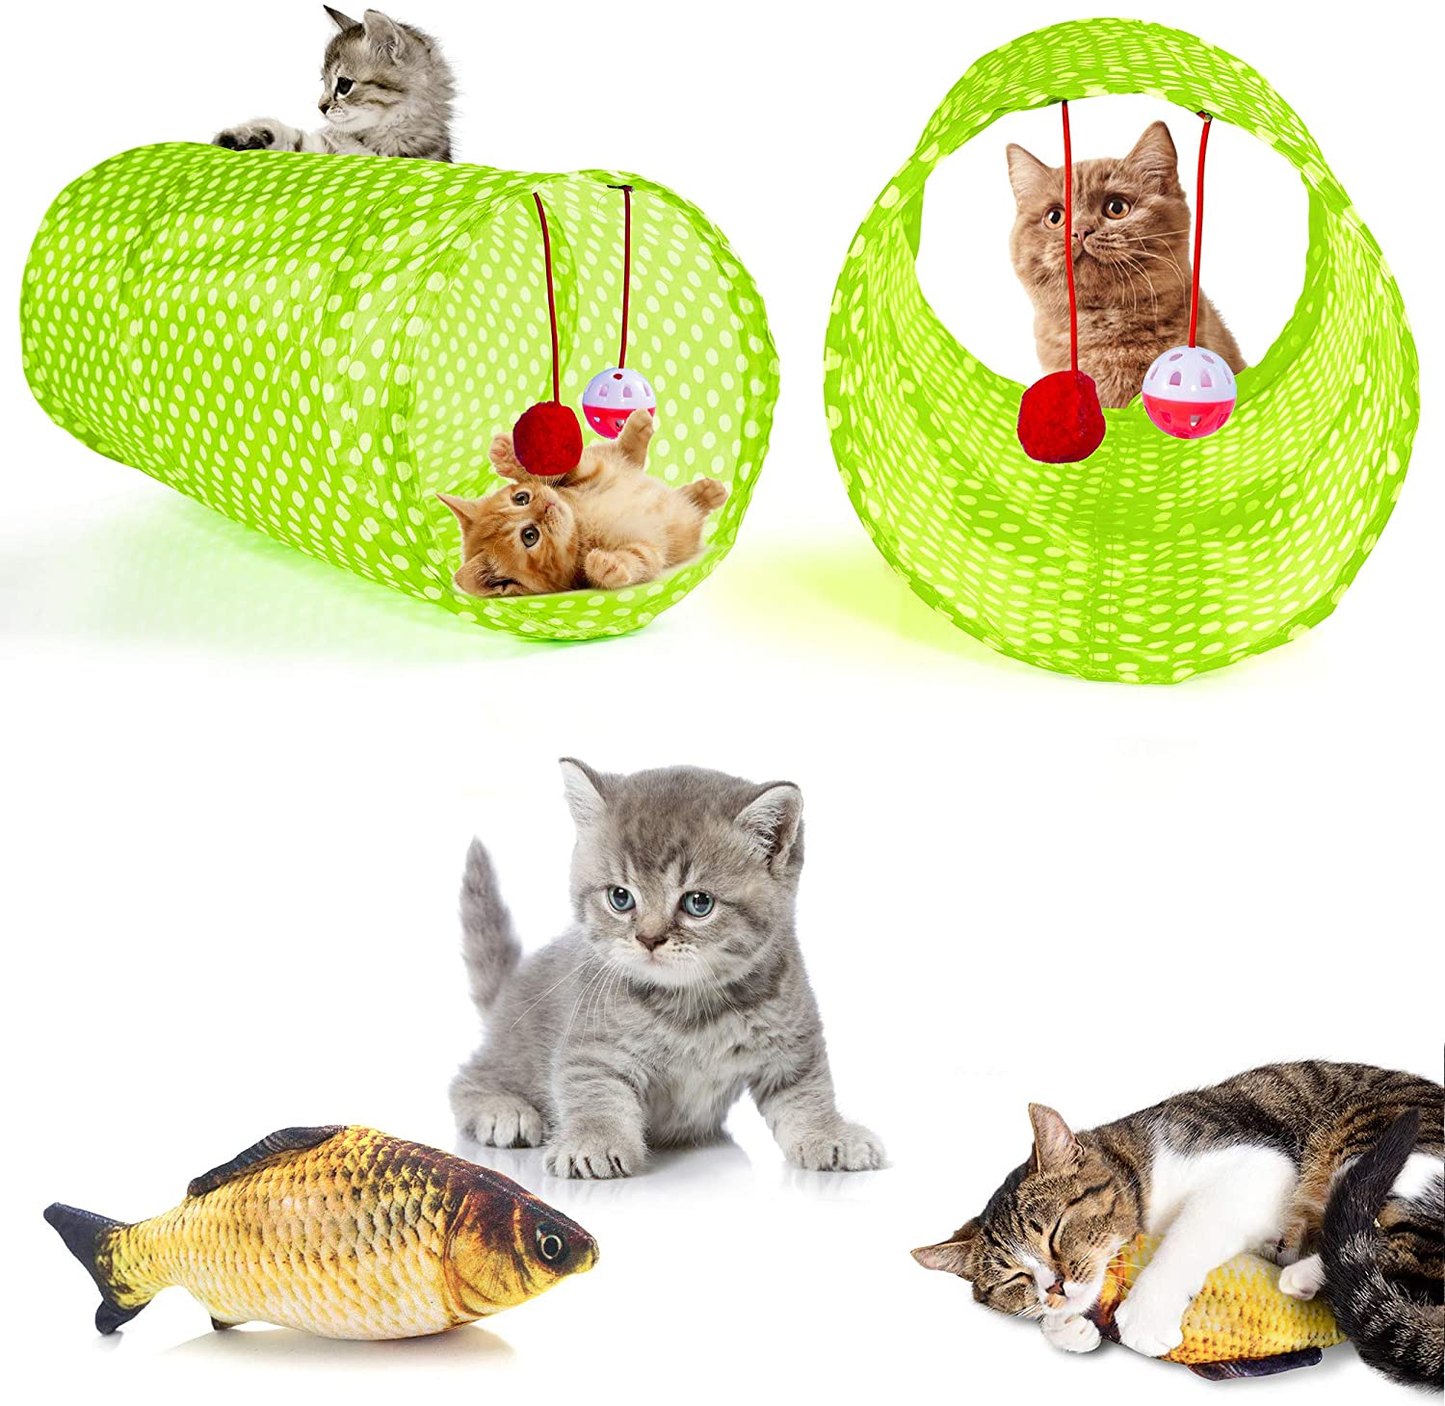 31 PCS Cat Toys Kitten Toys Assortments,Variety Catnip Toy Set Including 2 Way Tunnel,Cat Feather Teaser,Catnip Fish,Mice,Colorful Balls and Bells for Cat,Puppy,Kitty